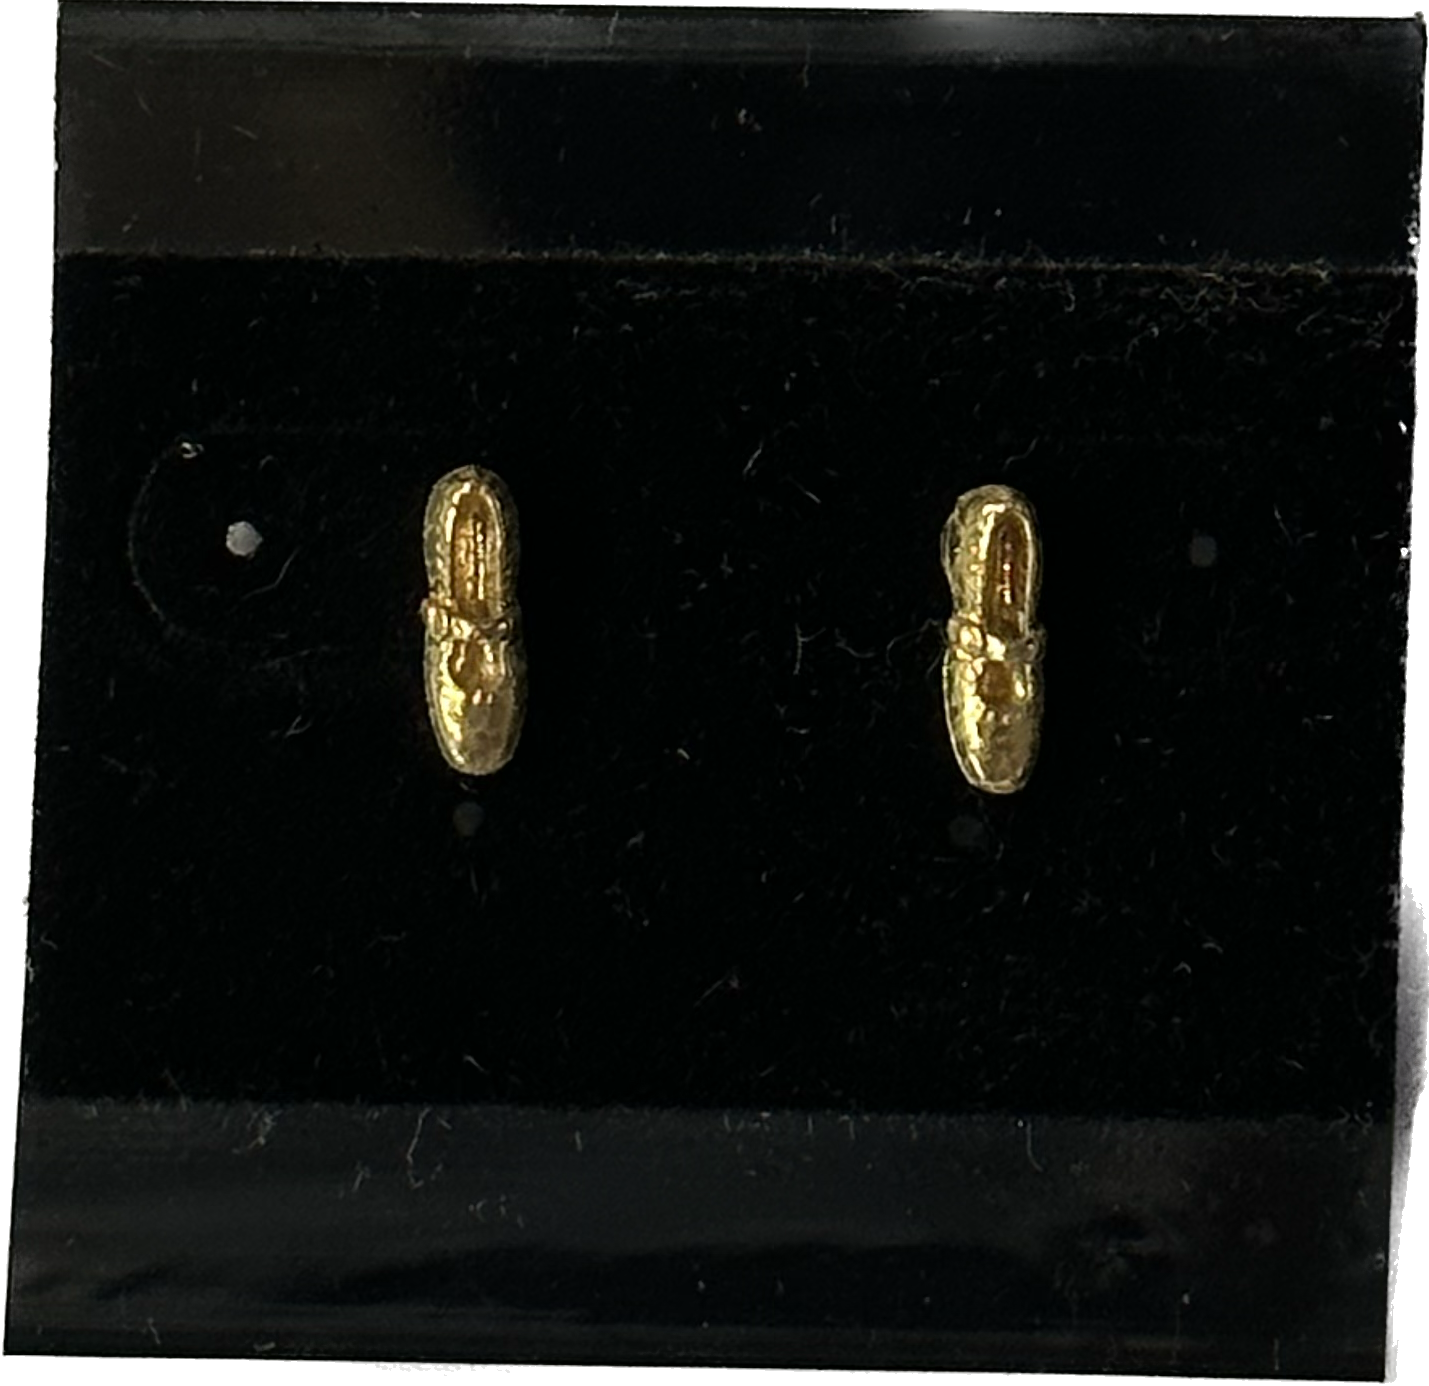 A gift of Gold Post Square Dance Shoe Earrings by Square Up Fashions in a black box.